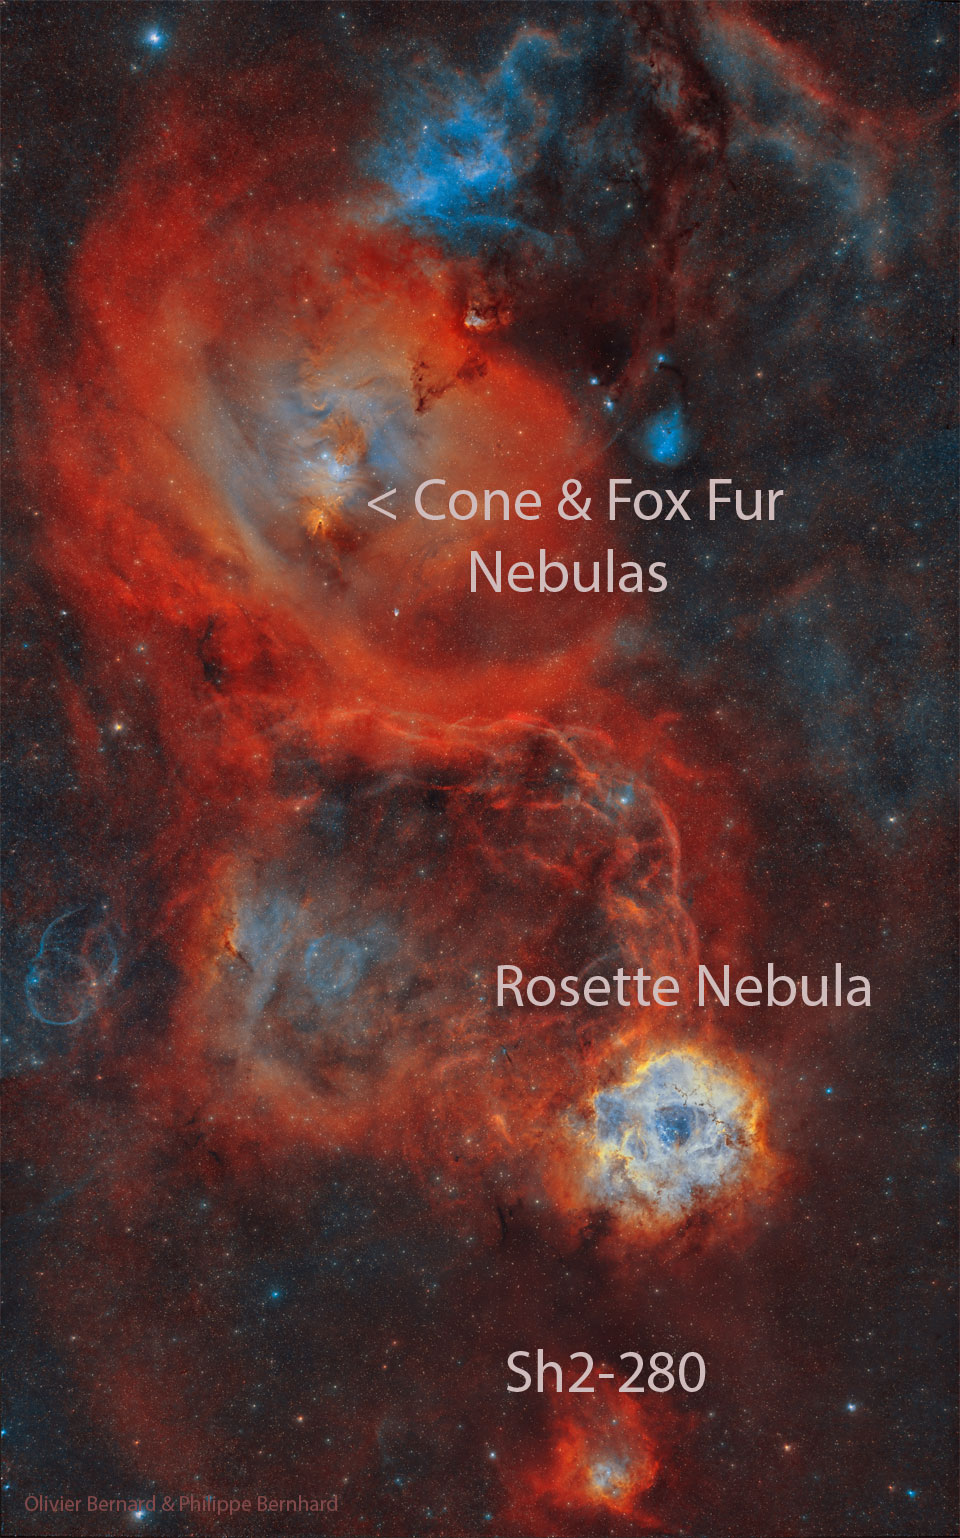 A busy star field is shown with several large red
nebulae. The Rosette Nebula is among them and seen on
the lower right, while the nebula surrounding the
Cone Nebula is larger and visible toward the upper left.
Please see the explanation for more detailed information.